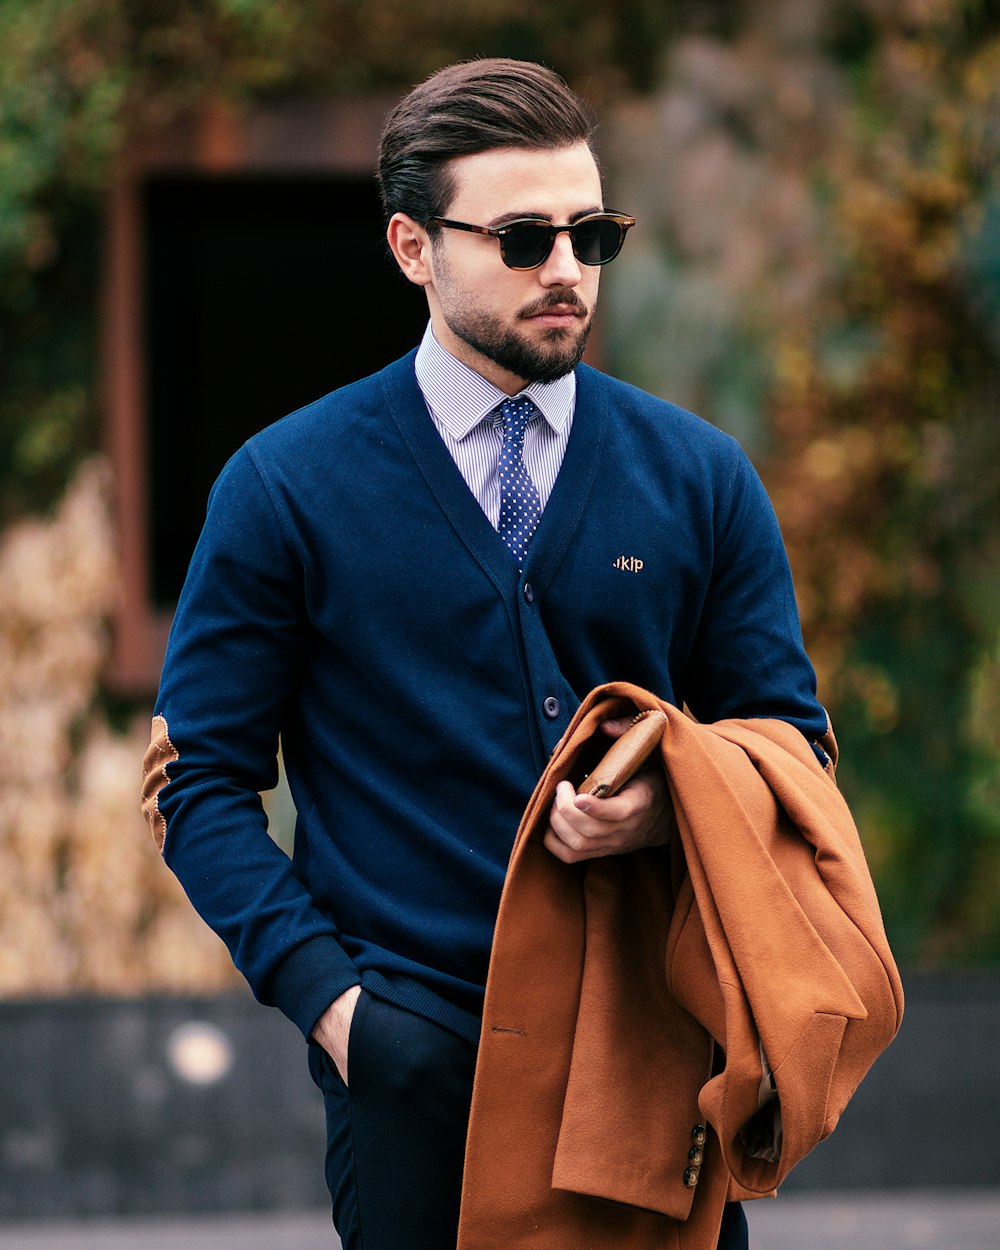 a man in a blue sweater and tie carrying a brown bag